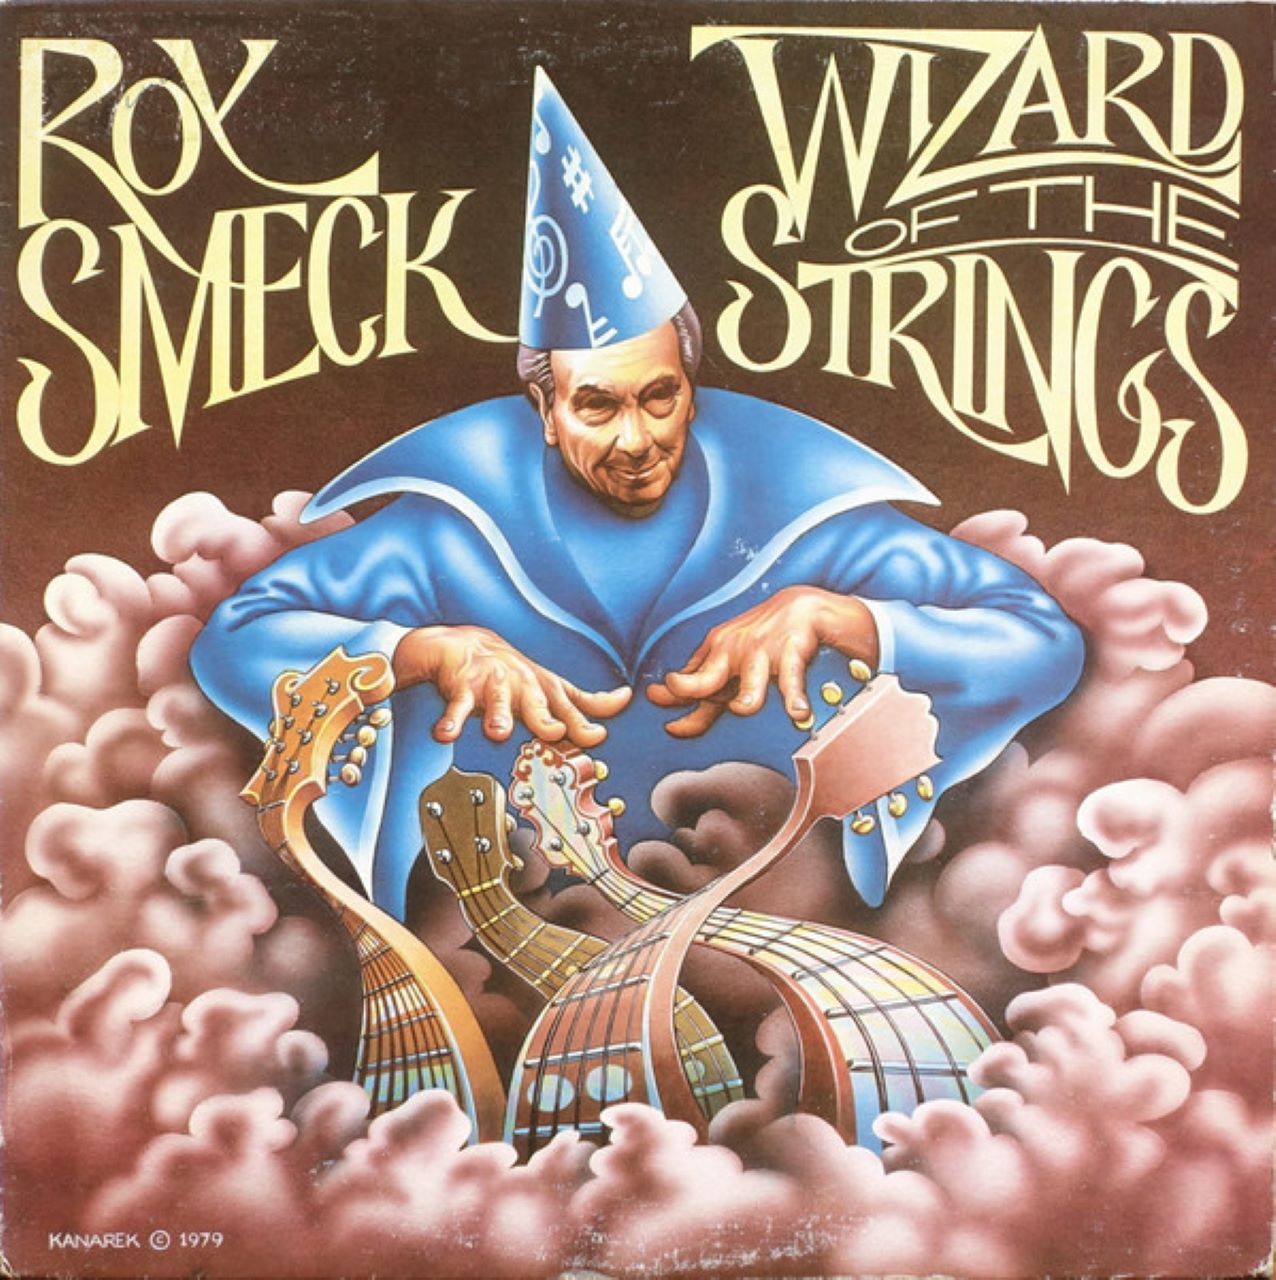 Roy Smeck - Wizard Of The Strings cover album